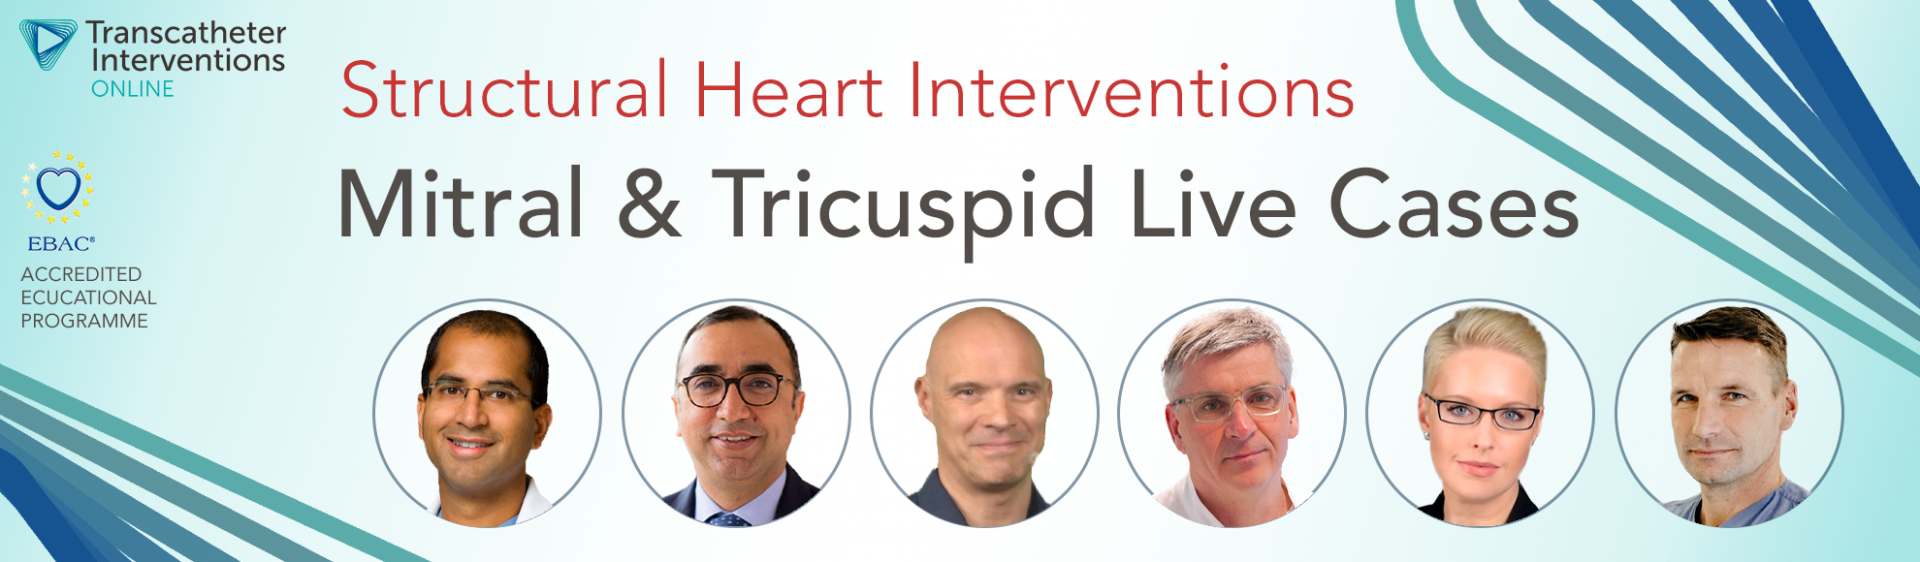 TIO 2020 – Mitral and Tricuspid Live Cases